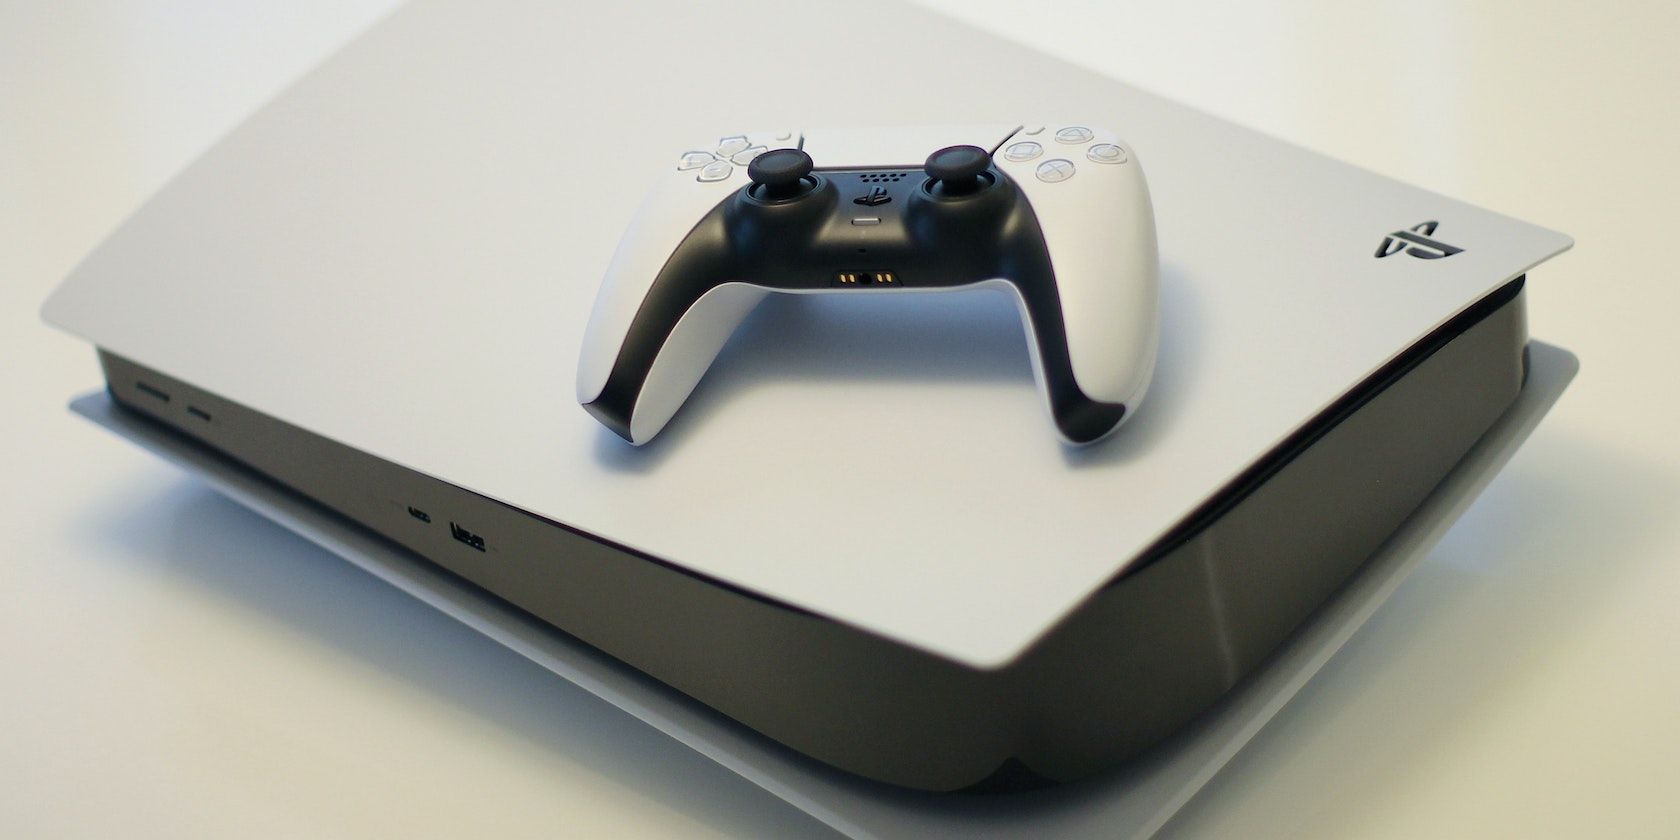 A PS5 on its side with a DualSense controller on it.